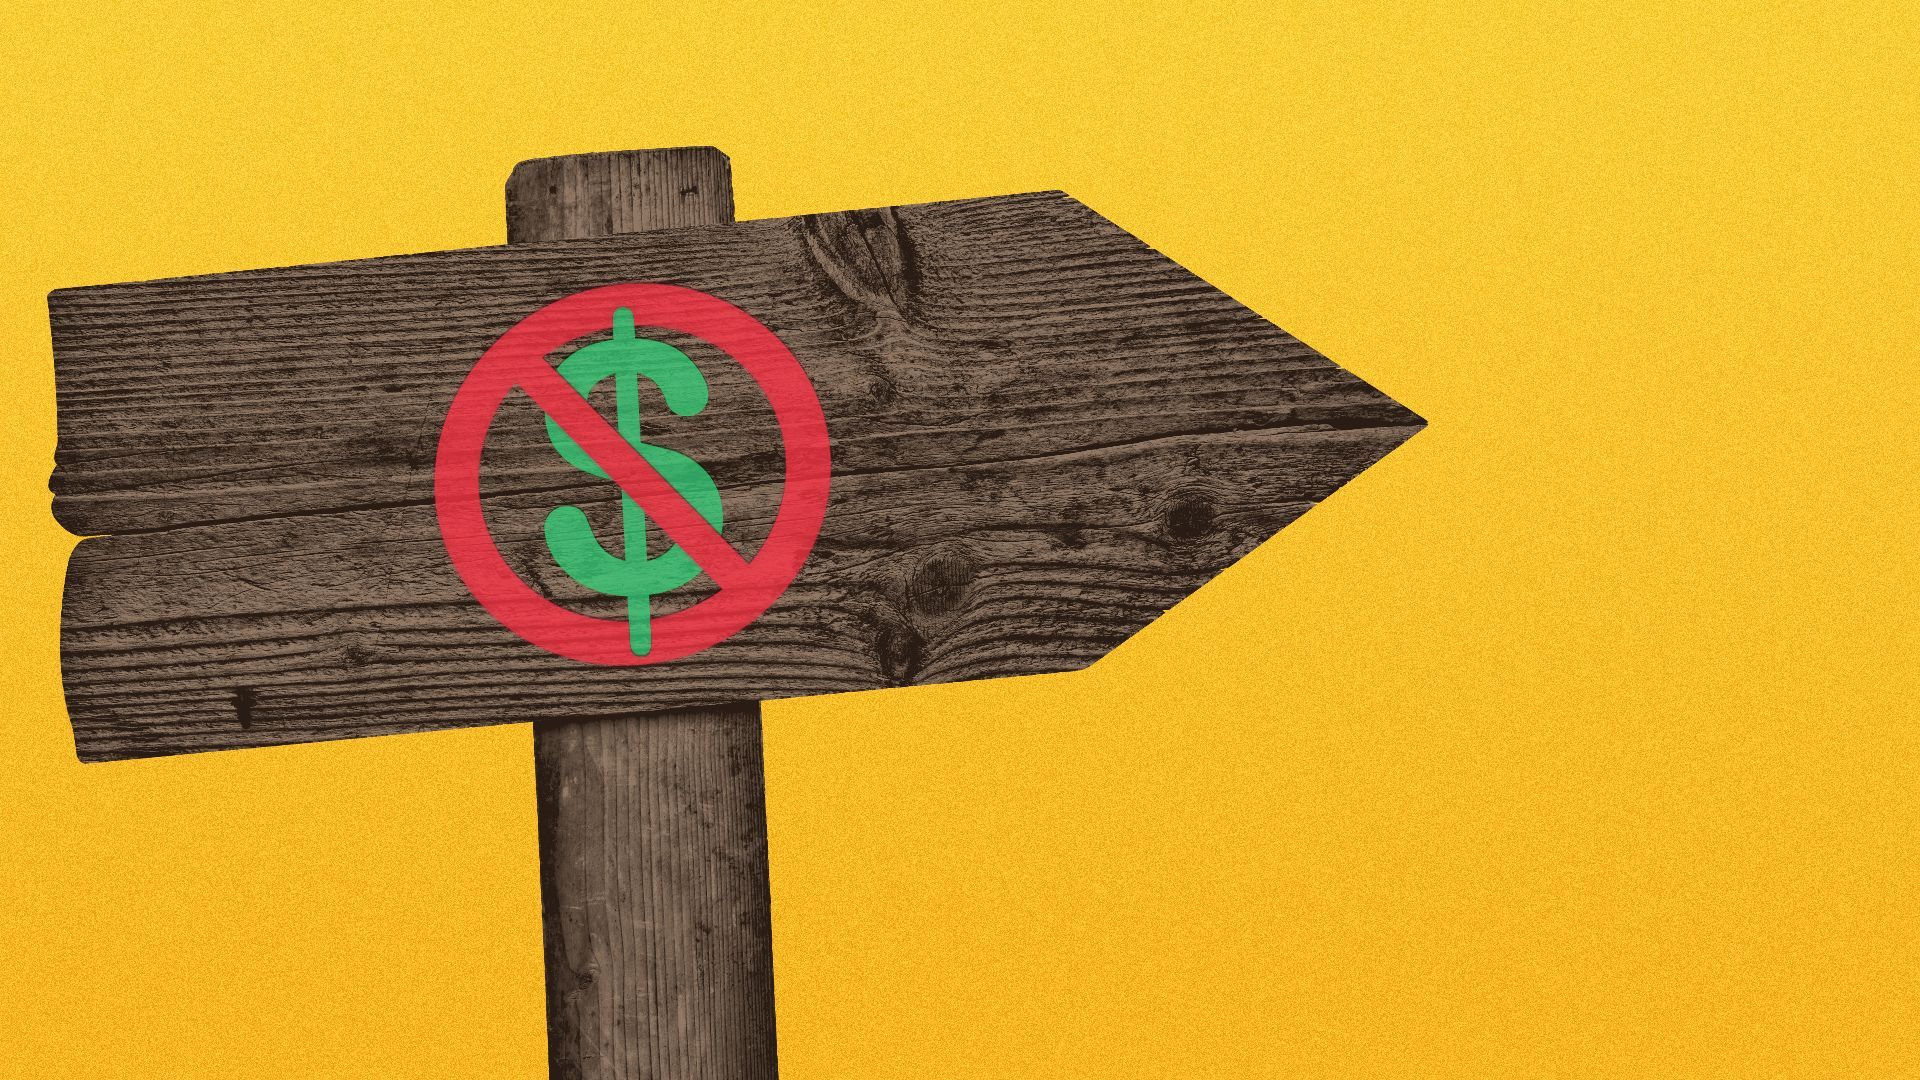 Illustration of a wooden arrow sign, featuring a dollar sign with a no-sign on top of it.